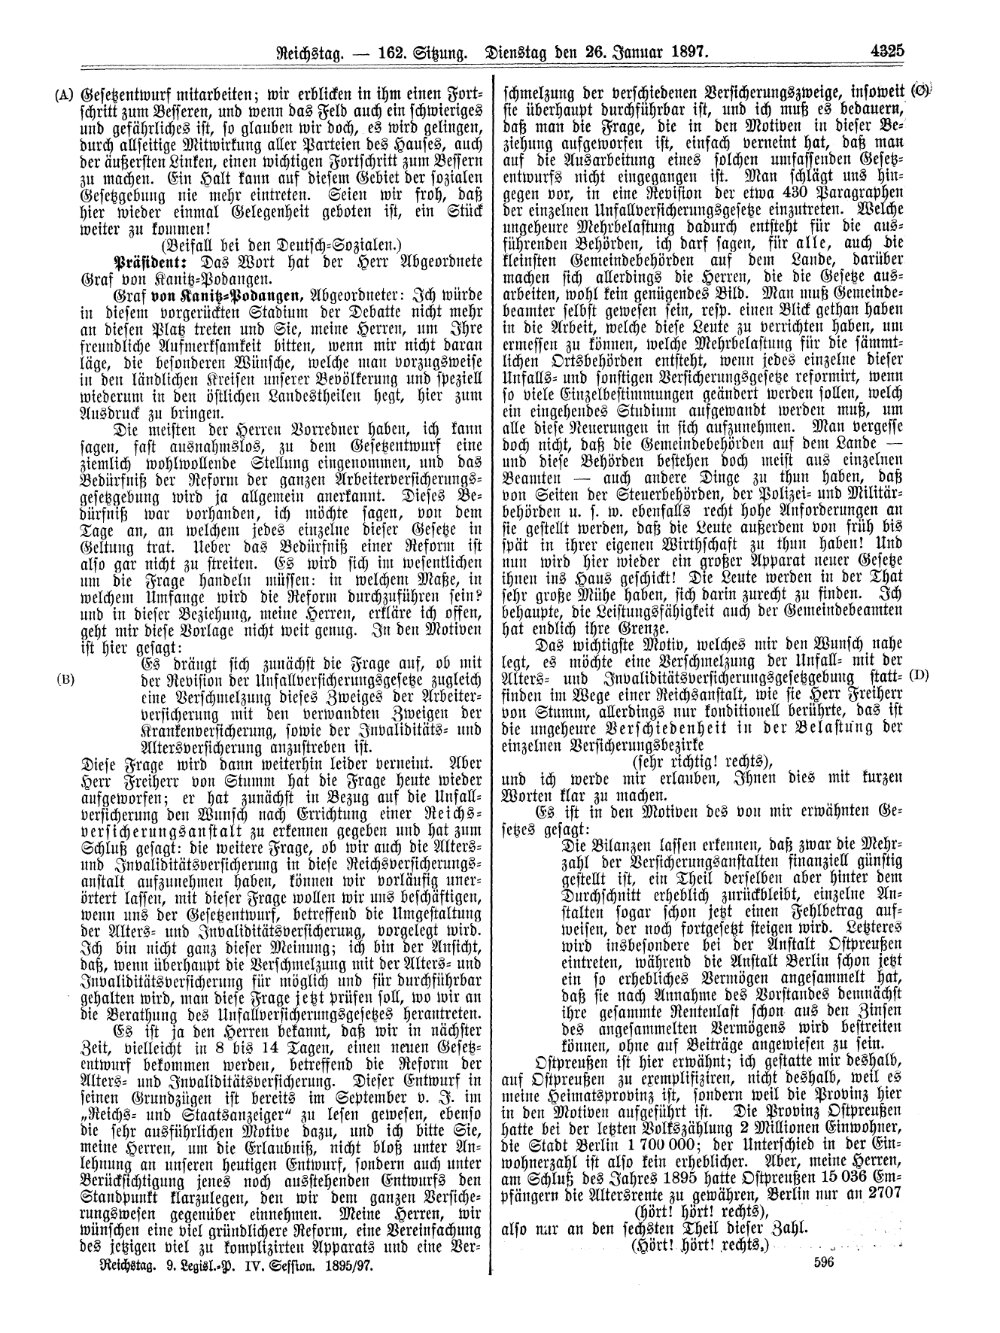 Scan of page 4325